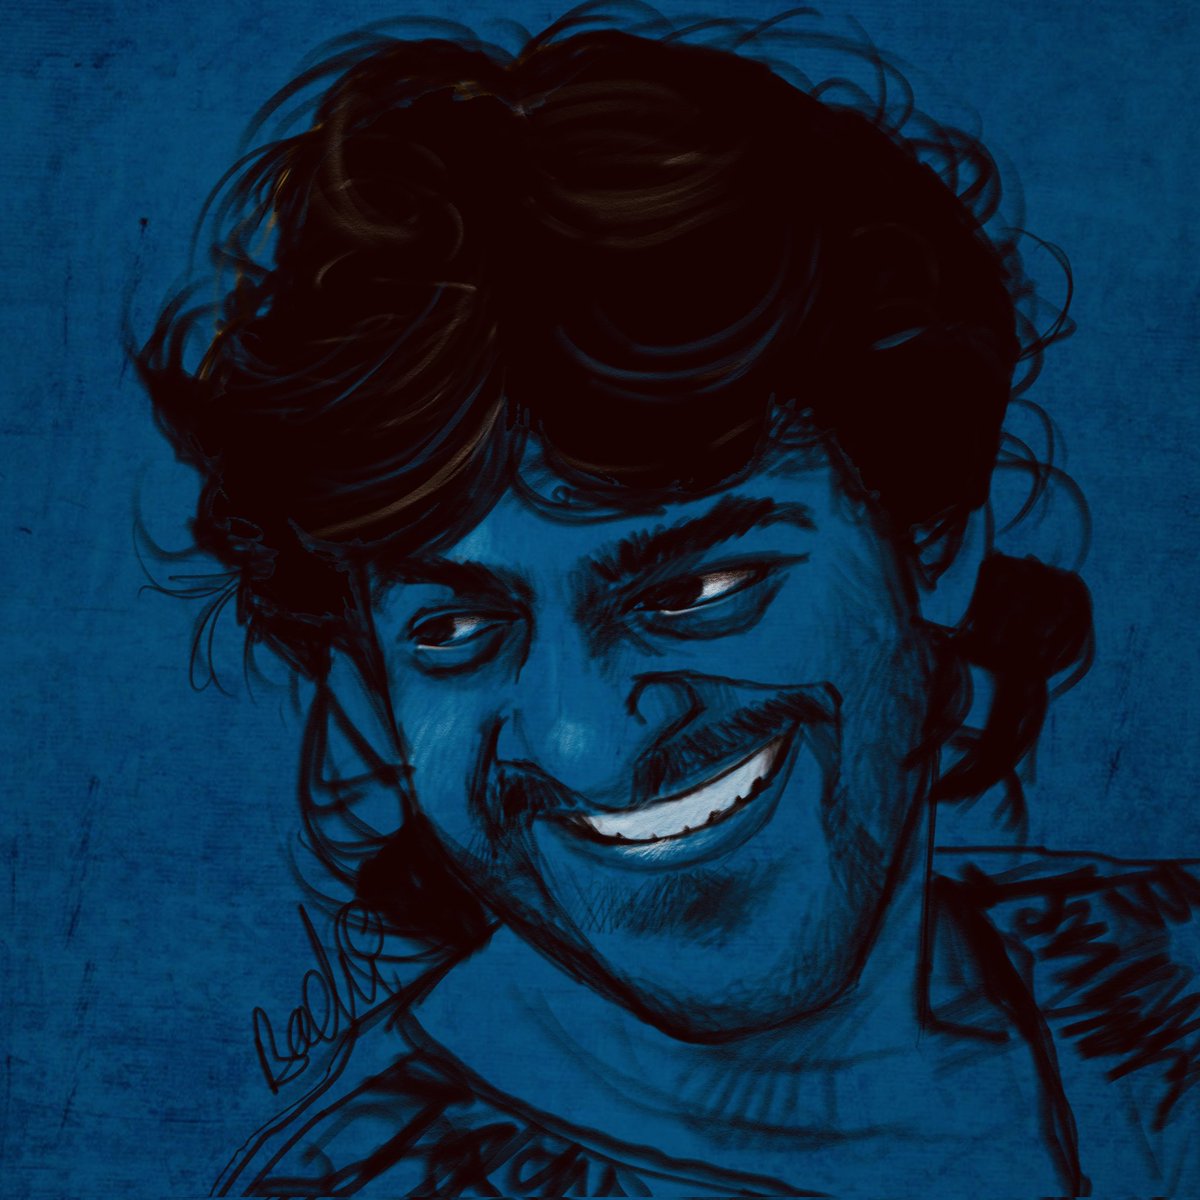 October 23rd #actor #prabhas #indianfilms #caricaturesbybadri #Caricatura #caricature #caricatures #art #digitalart #drawing #openforcommission #commissionsopen